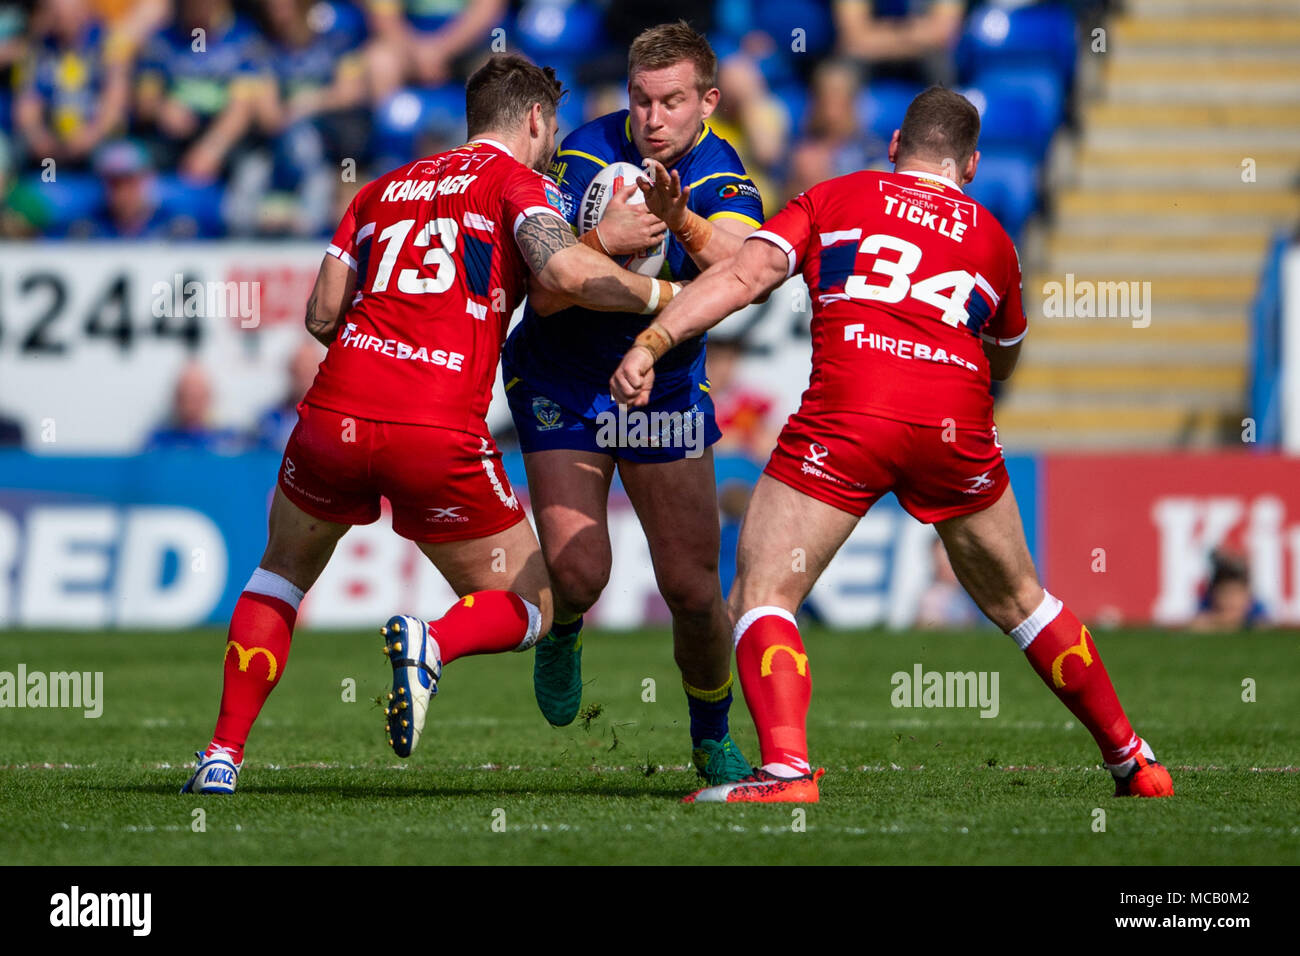 Warrington Wolves's Mike Cooper is tackled by Hull's Ben Kavanagh (L) and Danny Tickle (R)  14th April 2018 , The Halliwell Jones Stadium Mike Gregory Way, Warrington, WA2 7NE, England;  Betfred Super League rugby, Round 11, Warrington Wolves v Hull Kingston Rovers Stock Photo